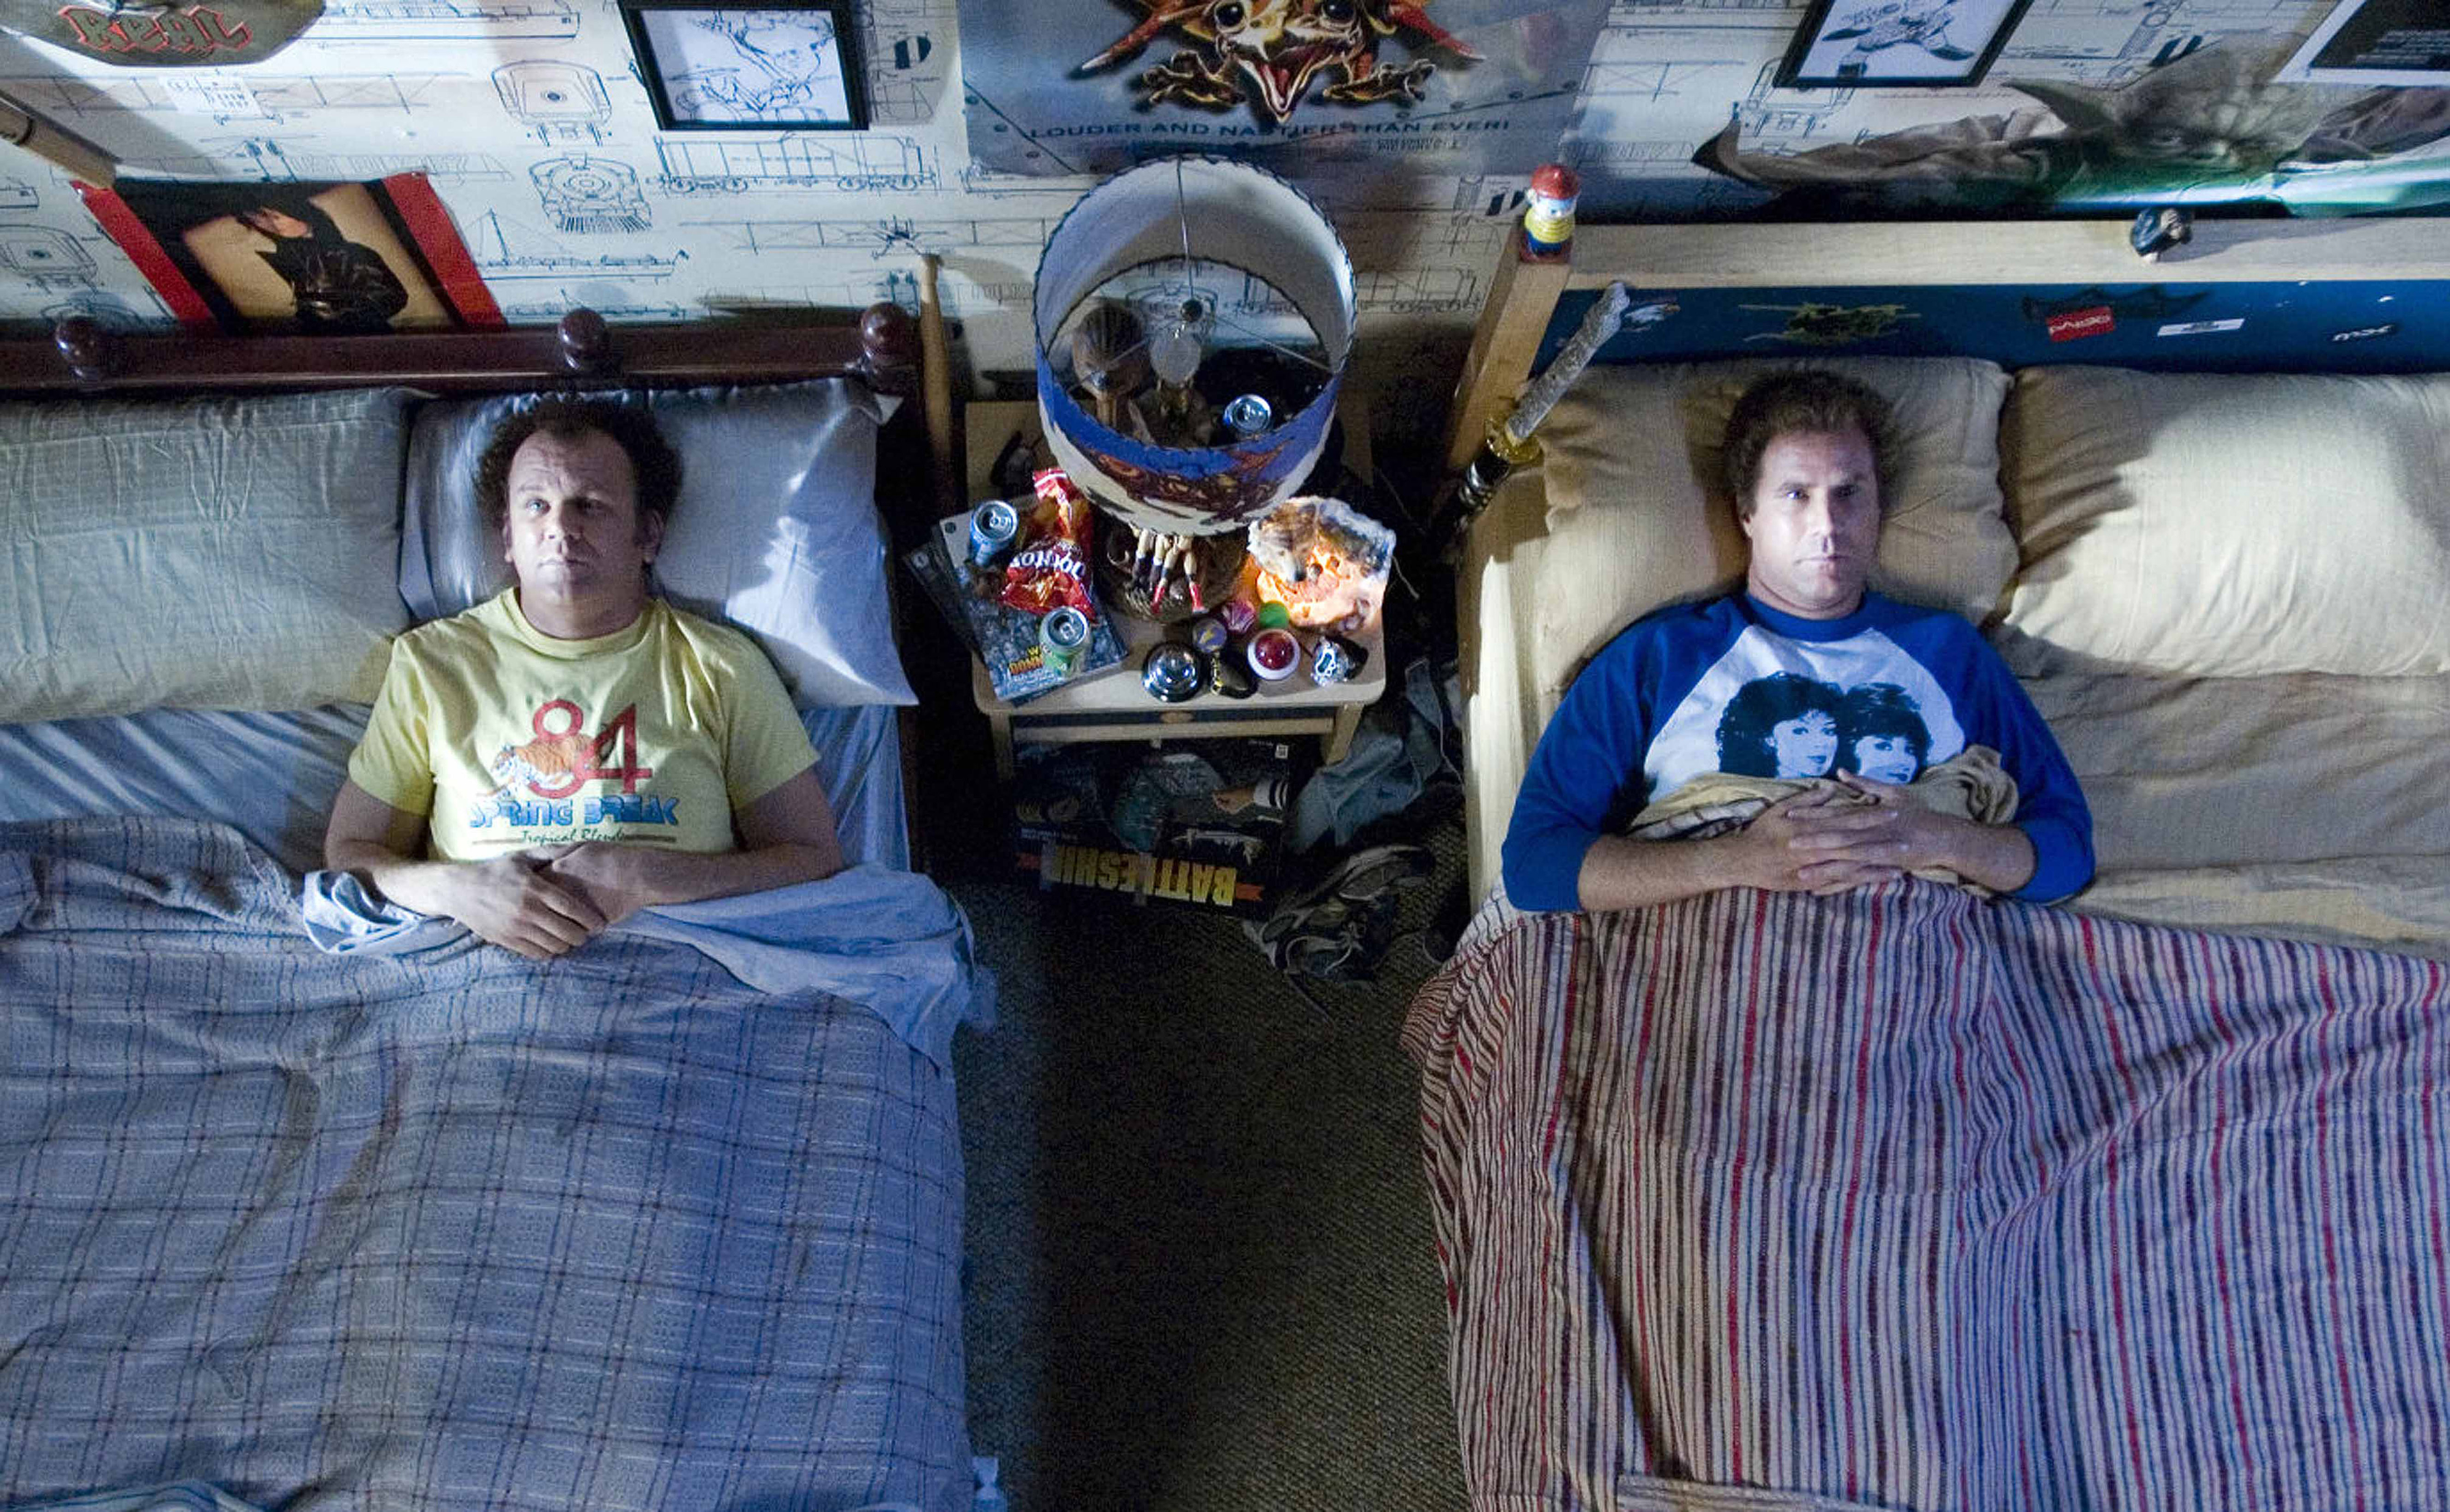 Will Ferrell and John C. Reilly laying in two different beds in Step Brothers